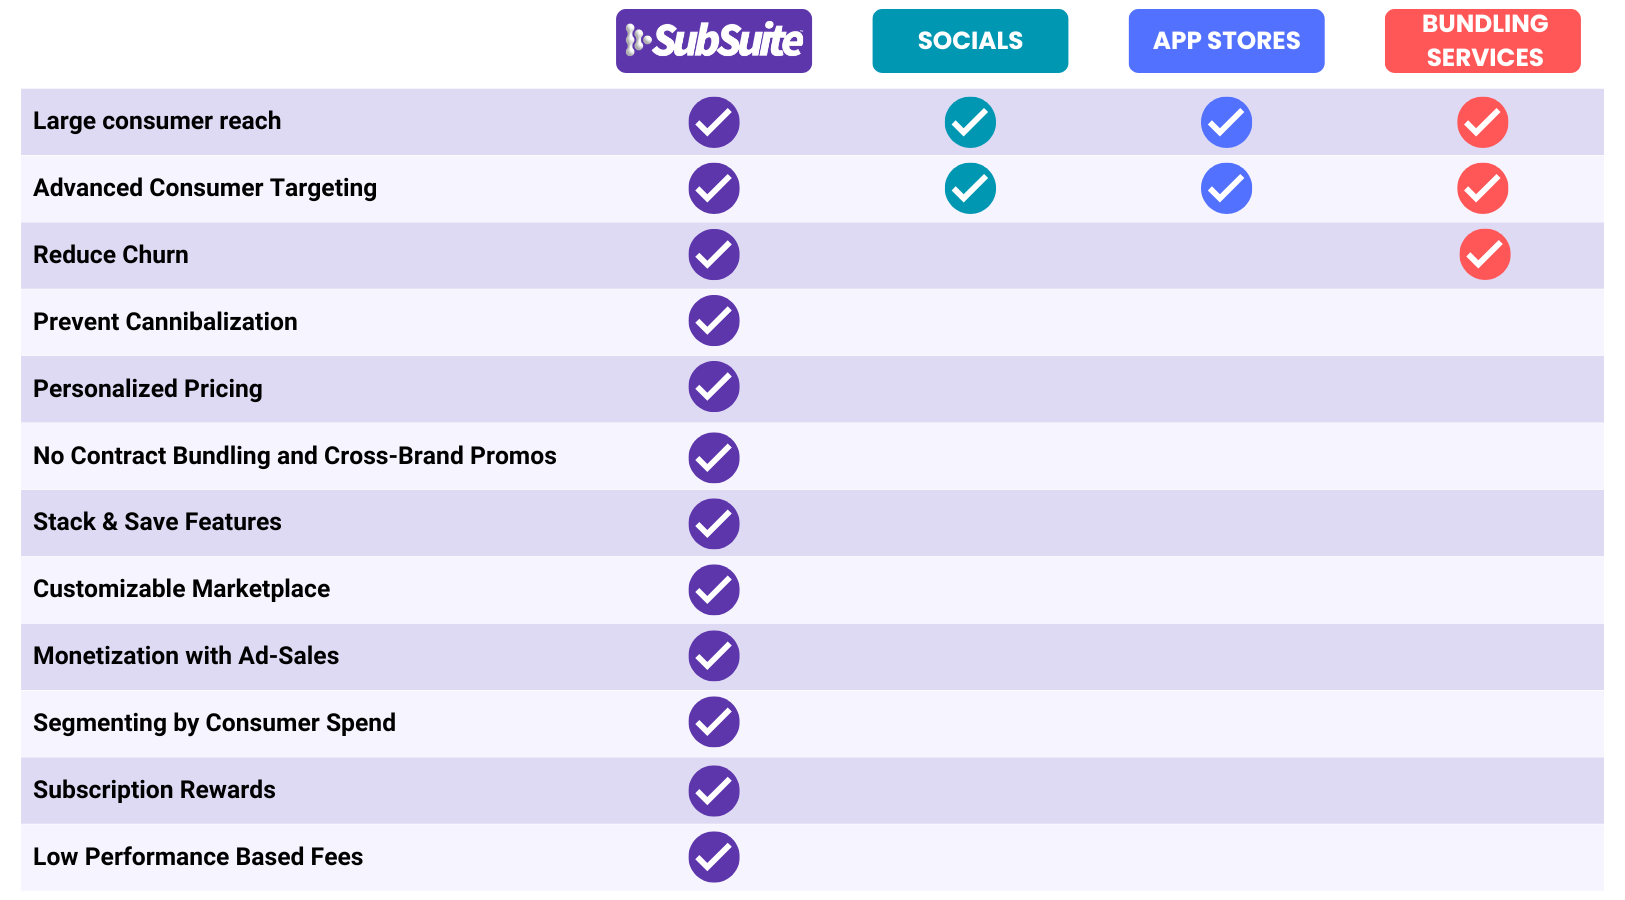 SubSuite compared to app stores and social platforms